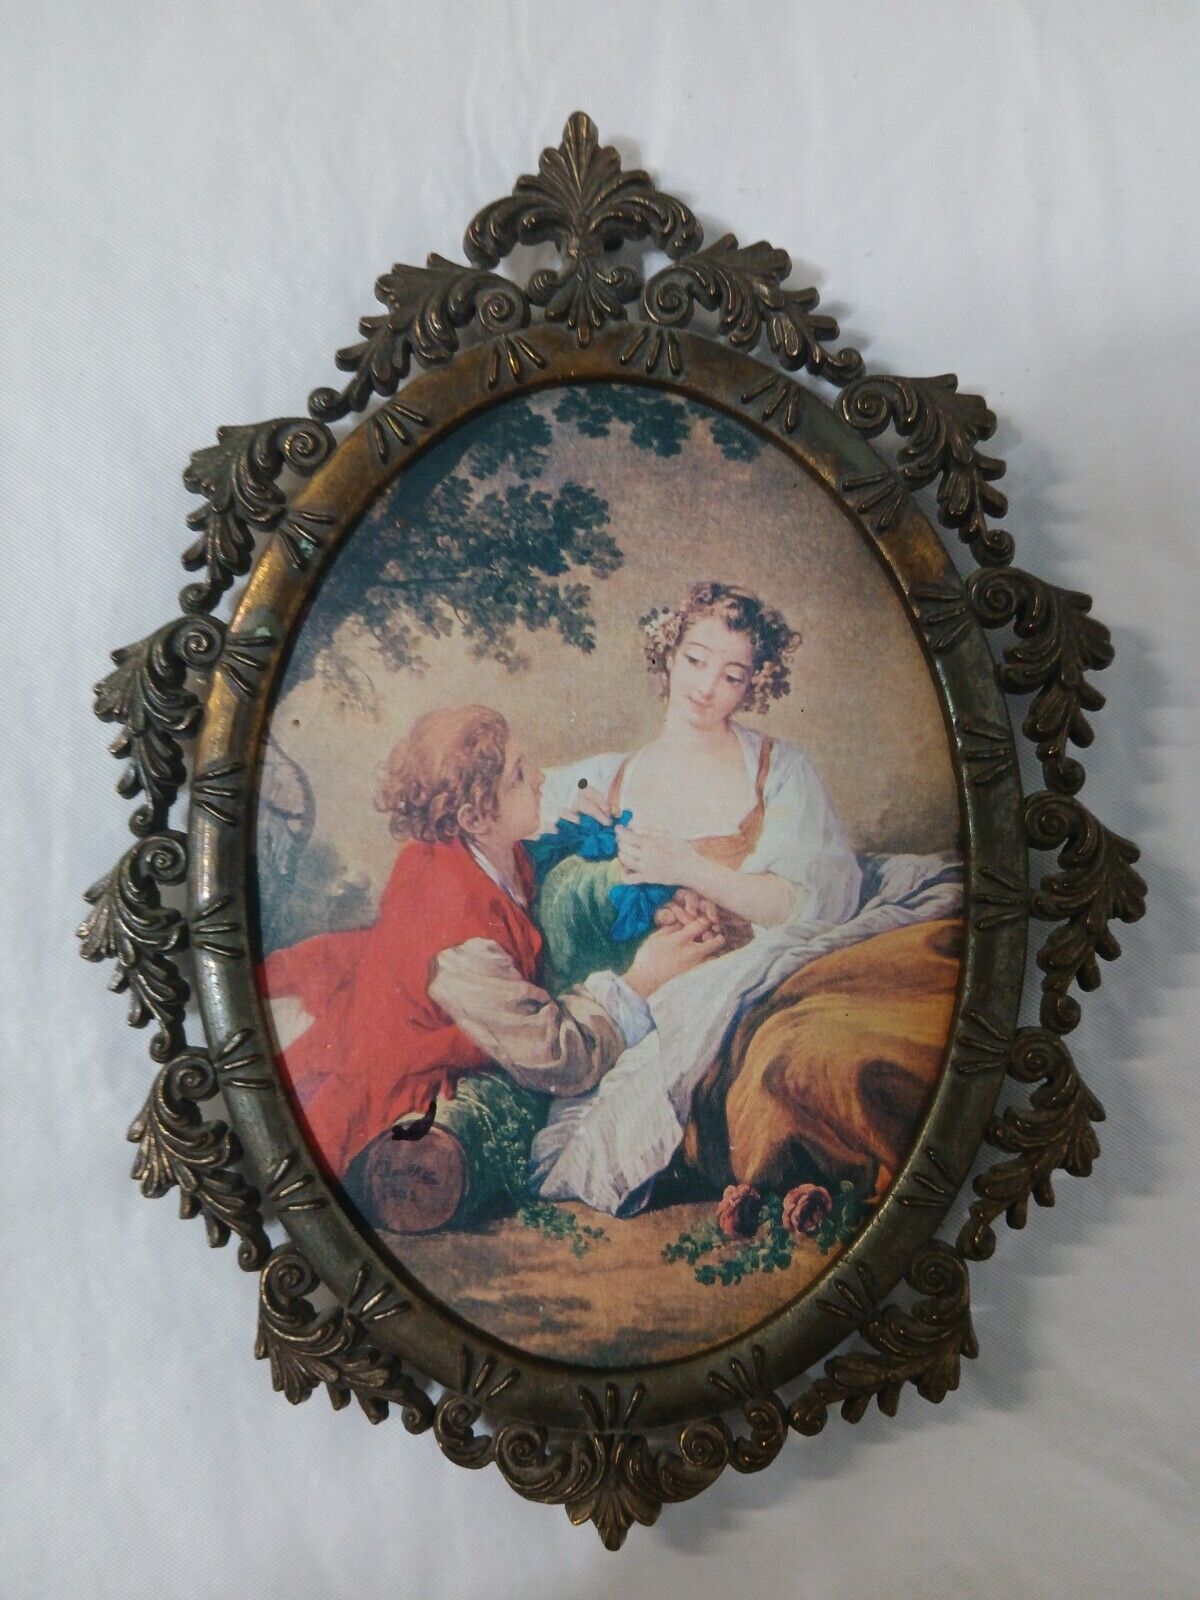 Vintage 1950s Italian Florentine Art No Glass 6.75” Metal Frame Made in Italy